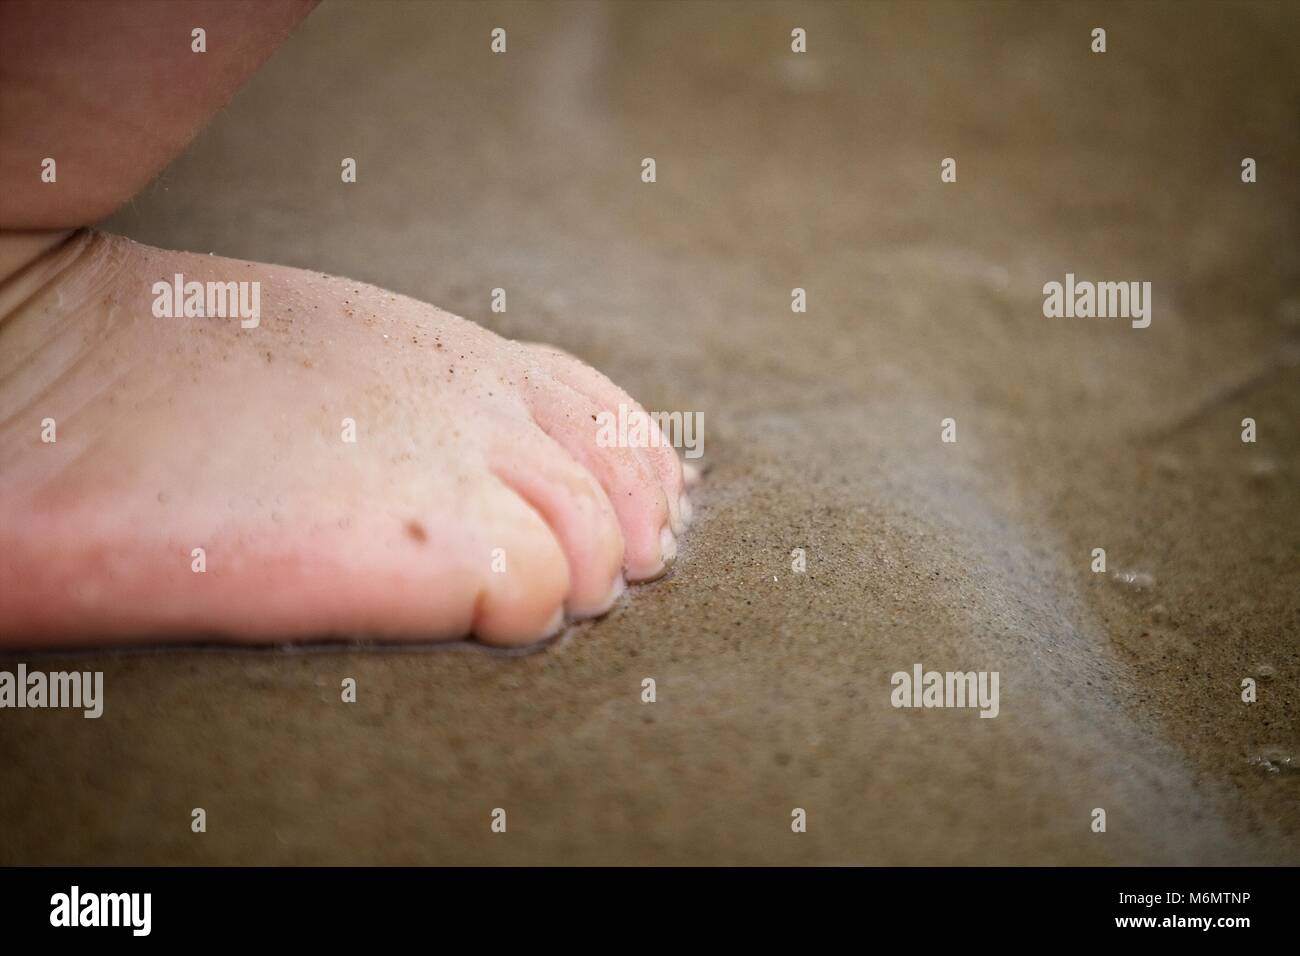 Happy bare feet on sandy beach. Feet covered in sand. Sunny. Shallow depth of field. Stock Photo